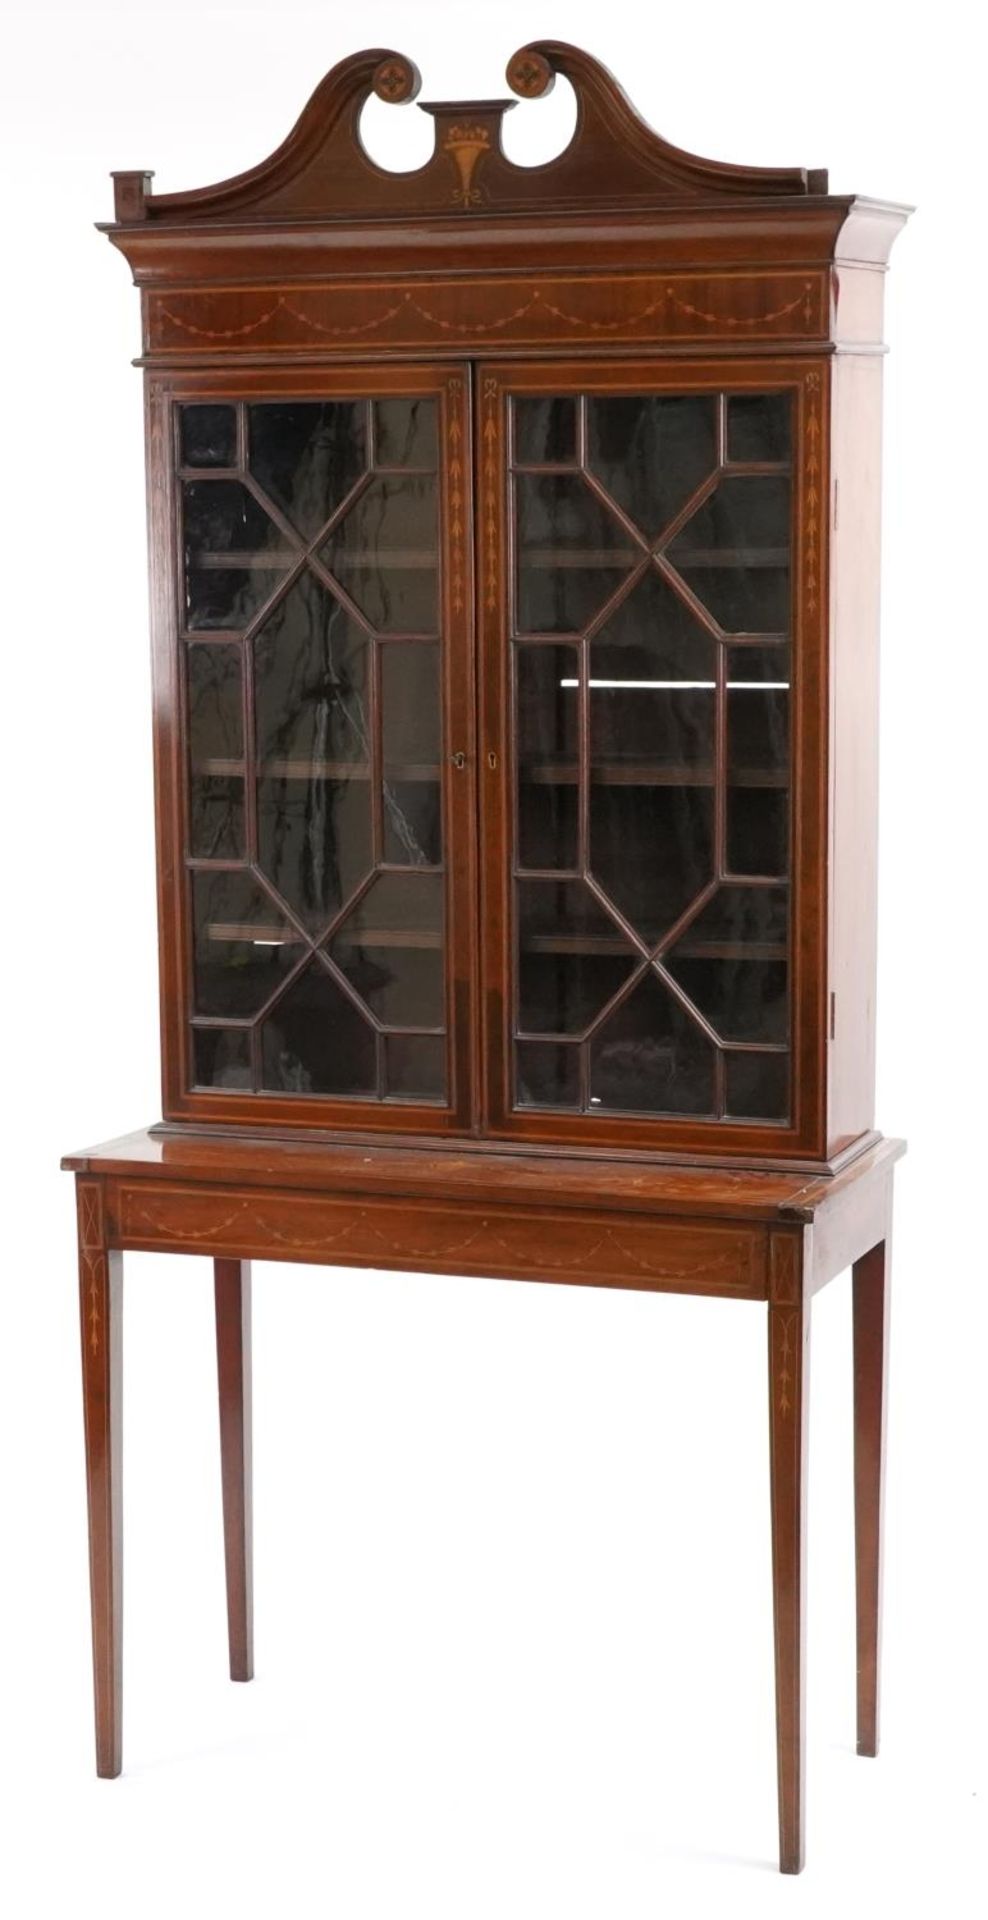 Edwardian inlaid mahogany bookcase on stand with astragal glazed doors on tapering legs, 189cm H x